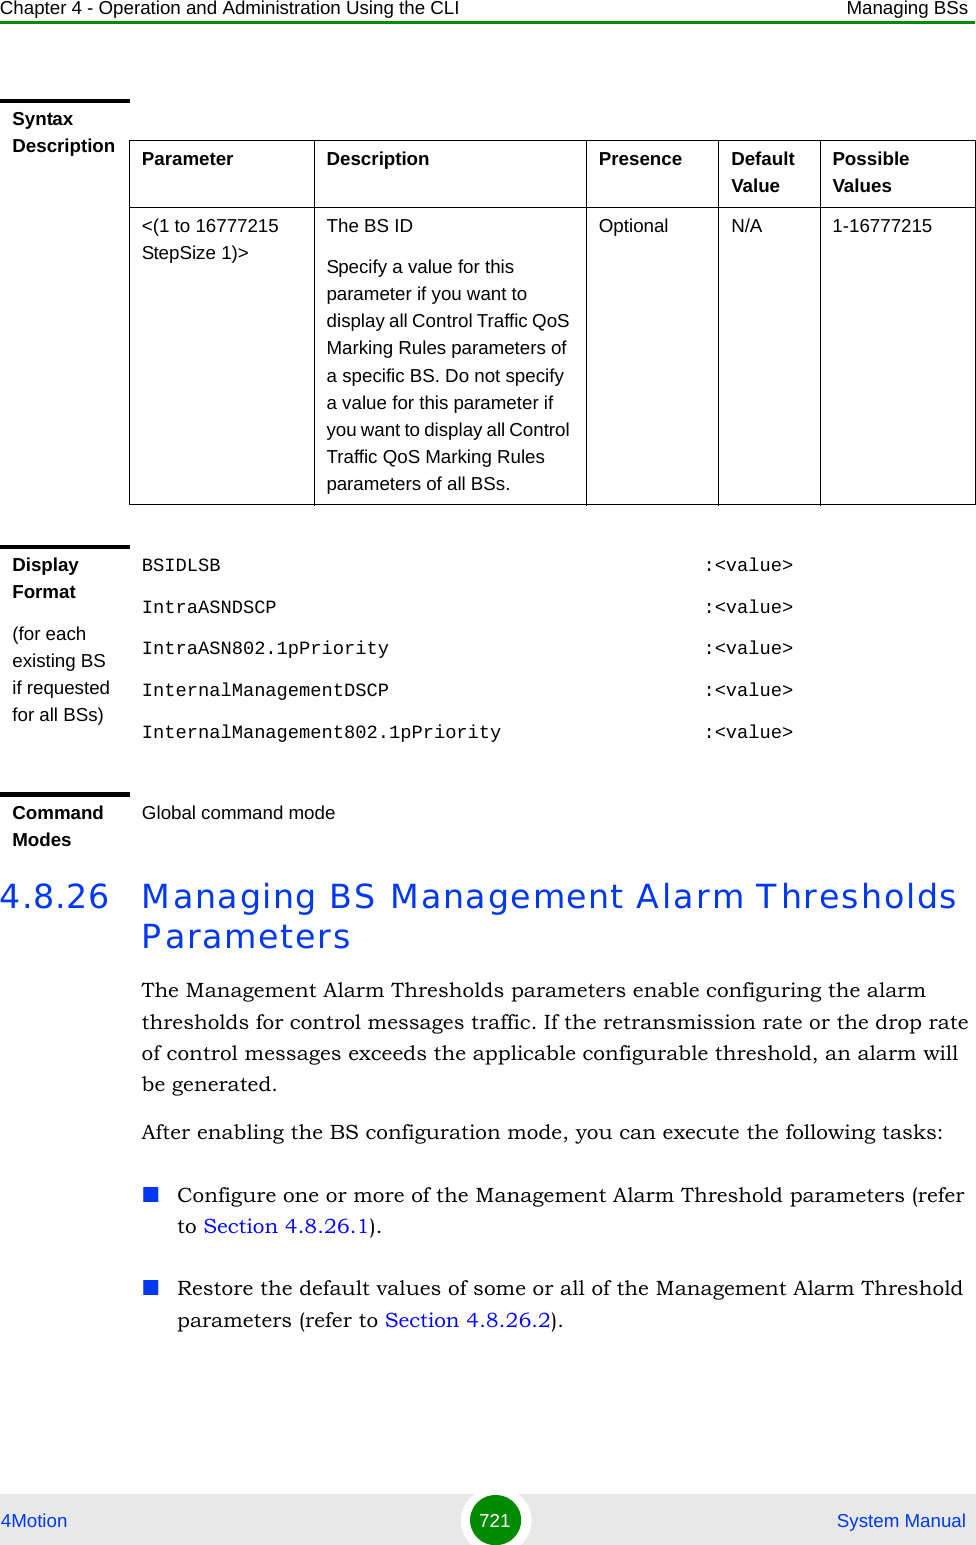 Chapter 4 - Operation and Administration Using the CLI Managing BSs4Motion 721  System Manual4.8.26 Managing BS Management Alarm Thresholds ParametersThe Management Alarm Thresholds parameters enable configuring the alarm thresholds for control messages traffic. If the retransmission rate or the drop rate of control messages exceeds the applicable configurable threshold, an alarm will be generated.After enabling the BS configuration mode, you can execute the following tasks:Configure one or more of the Management Alarm Threshold parameters (refer to Section 4.8.26.1).Restore the default values of some or all of the Management Alarm Threshold parameters (refer to Section 4.8.26.2).Syntax Description Parameter Description Presence Default ValuePossible Values&lt;(1 to 16777215 StepSize 1)&gt;The BS ID Specify a value for this parameter if you want to display all Control Traffic QoS Marking Rules parameters of a specific BS. Do not specify a value for this parameter if you want to display all Control Traffic QoS Marking Rules parameters of all BSs.Optional N/A 1-16777215Display Format(for each existing BS if requested for all BSs)BSIDLSB                                           :&lt;value&gt;IntraASNDSCP                                      :&lt;value&gt;IntraASN802.1pPriority                            :&lt;value&gt;InternalManagementDSCP                            :&lt;value&gt;InternalManagement802.1pPriority                  :&lt;value&gt;Command ModesGlobal command mode